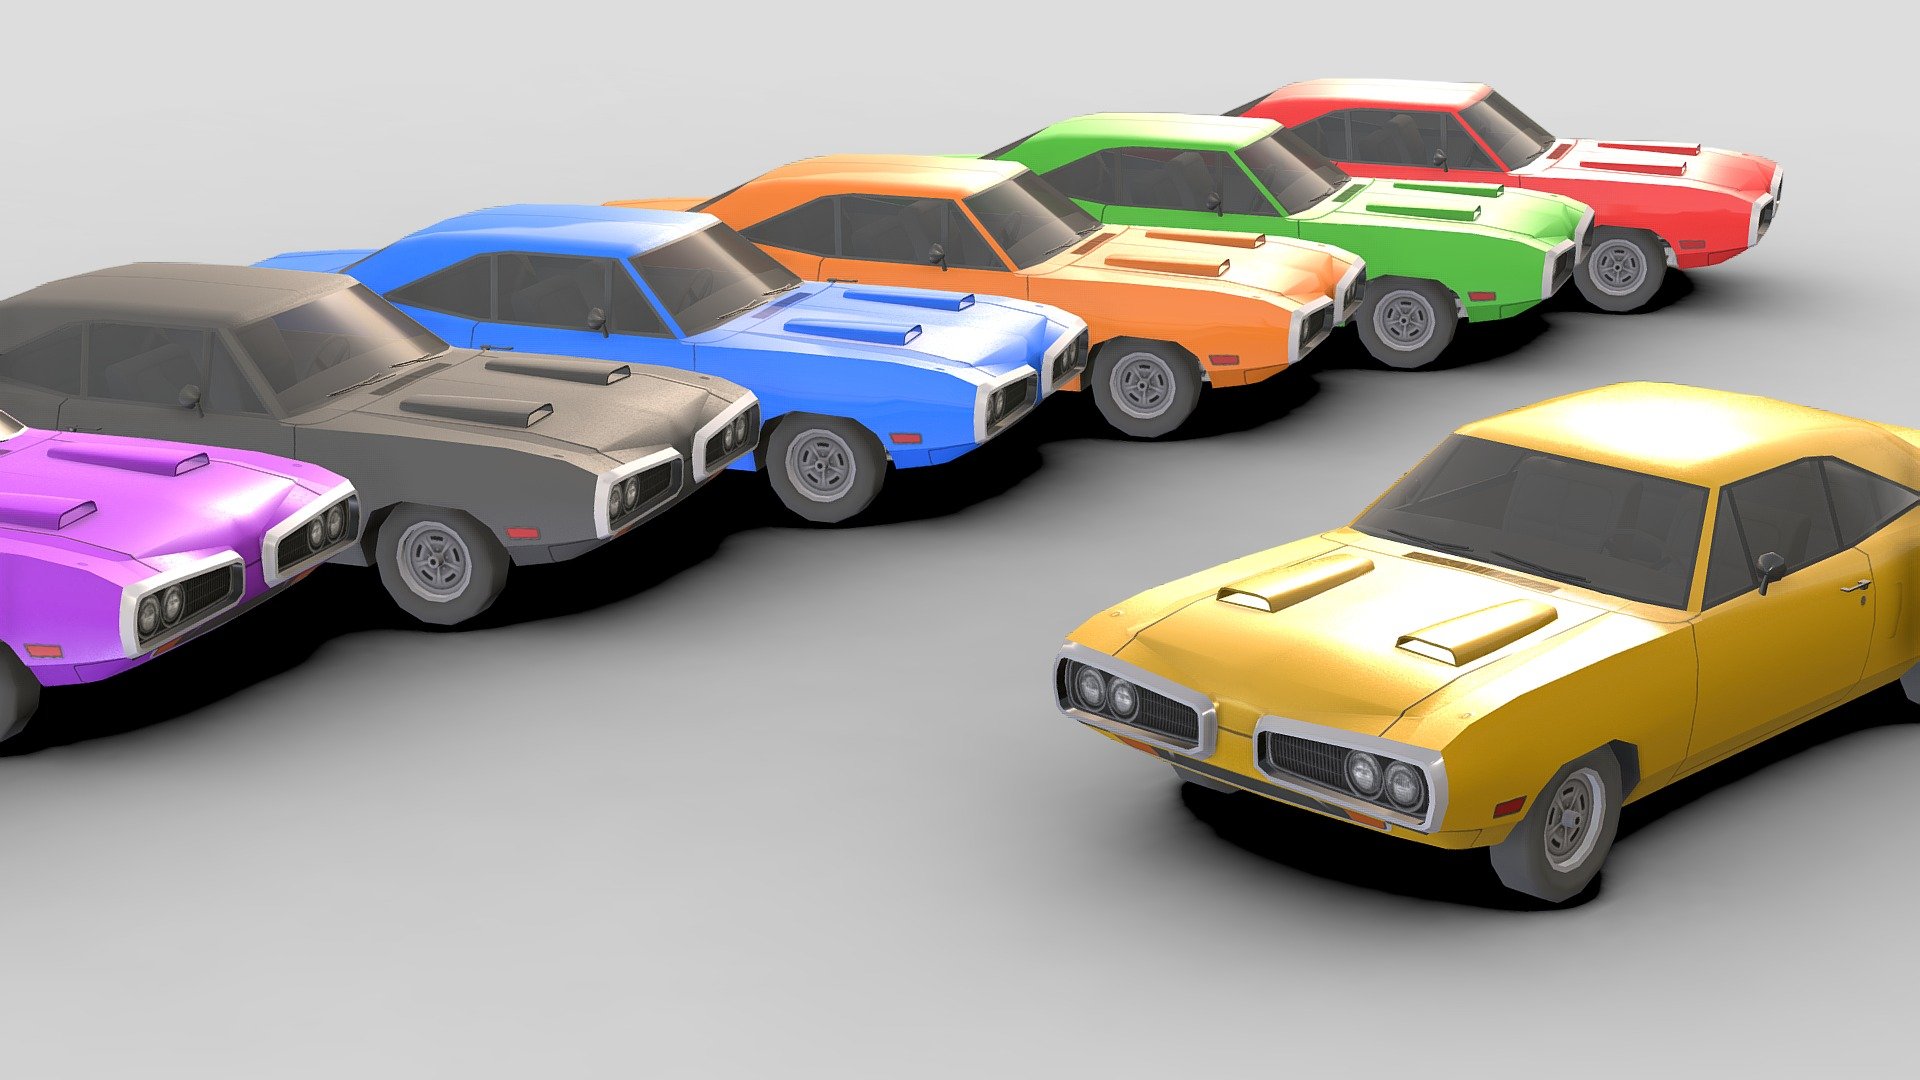 Classic Car # 11 .

You can use these models in any game and project.

This model is made with order and precision.

Separated parts (bodys . wheels . Steer ).

This car has 7 different colors.

Very Low- Poly.

The interior of this car is very low poly.

Average poly count: 5,000 tris.

Texture size: 2048 / 1024 / 512 (PNG).

It has a UV map texture.

Number of textures: 3.

Number of materials: 4.

Format: Fbx / Obj / 3DMax .

The original files are in the Additional file .

Wait for my new models.. Your friend (Sidra) 3d model